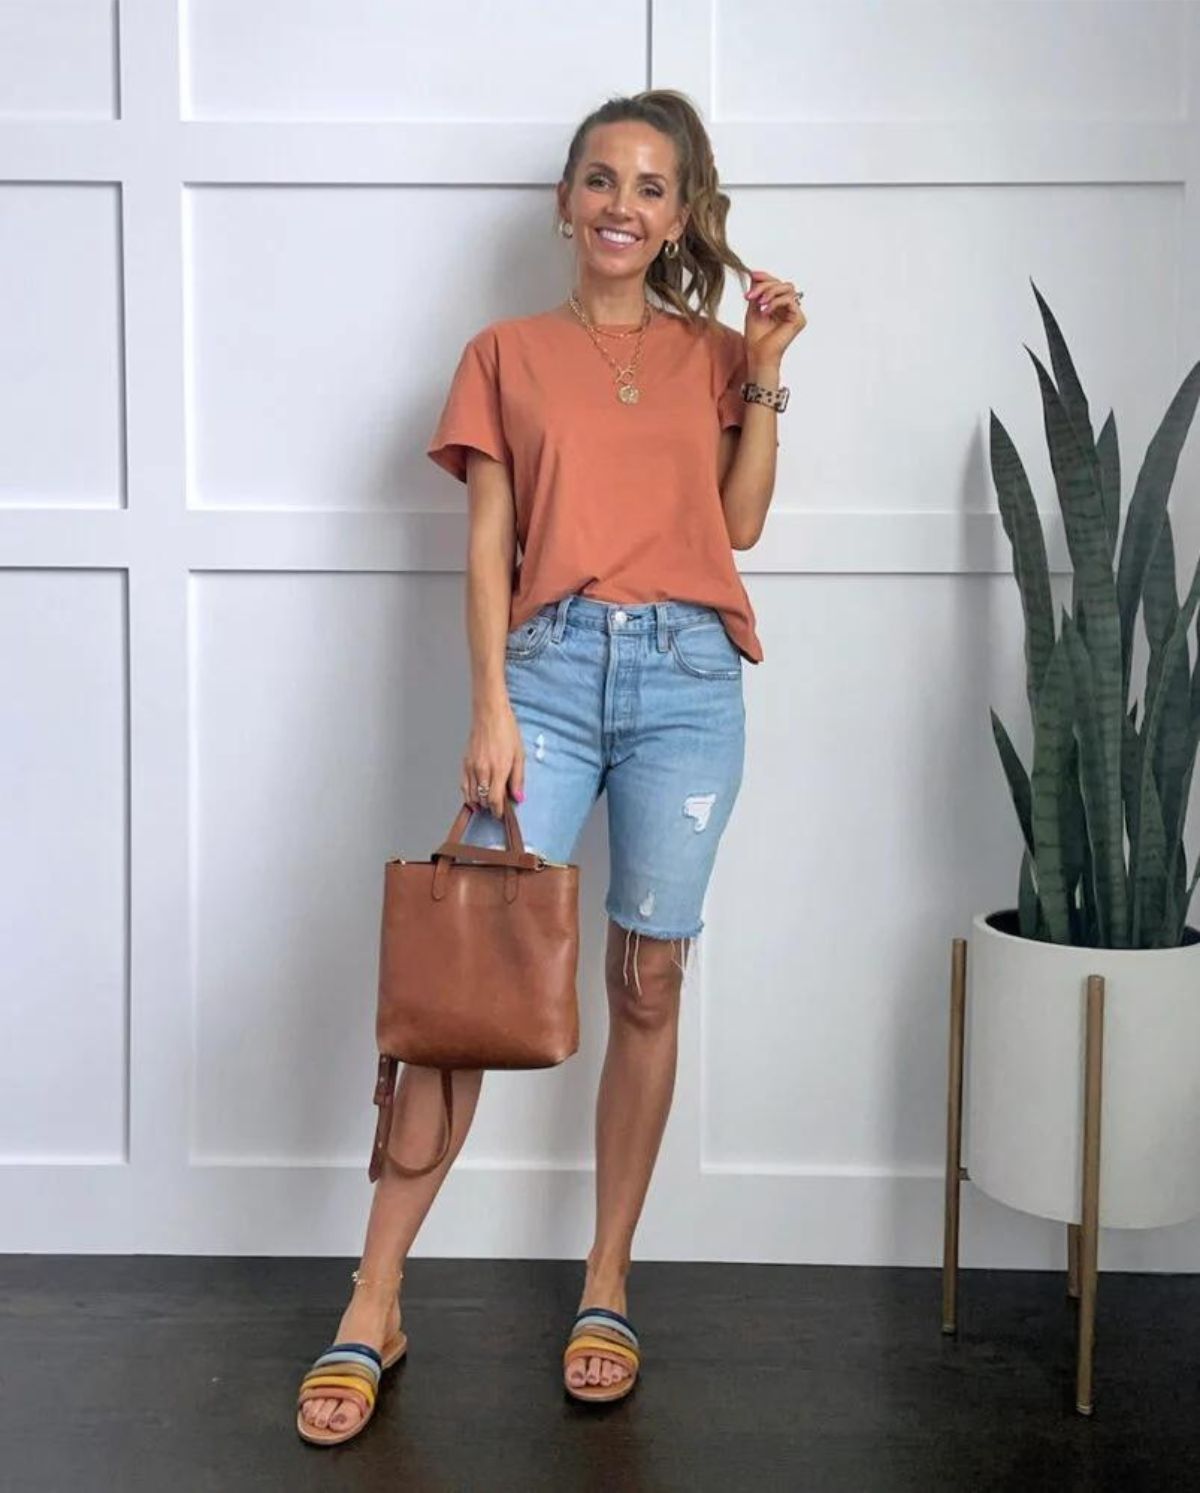 Bermuda Shorts Outfit Ideas